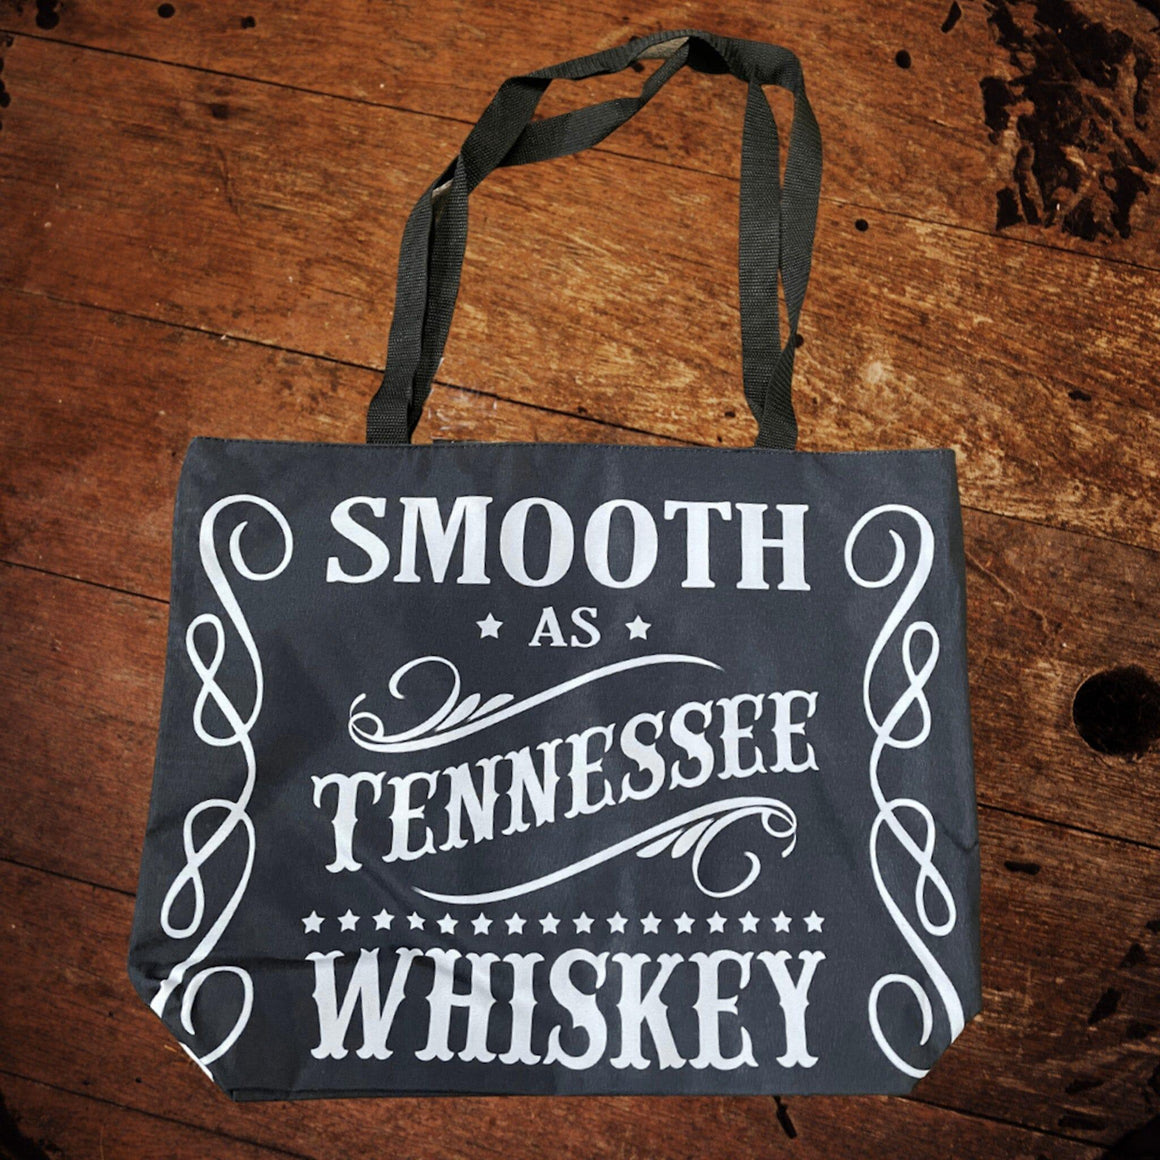 Smooth as Tennessee Whiskey Tote Bag - The Whiskey Cave